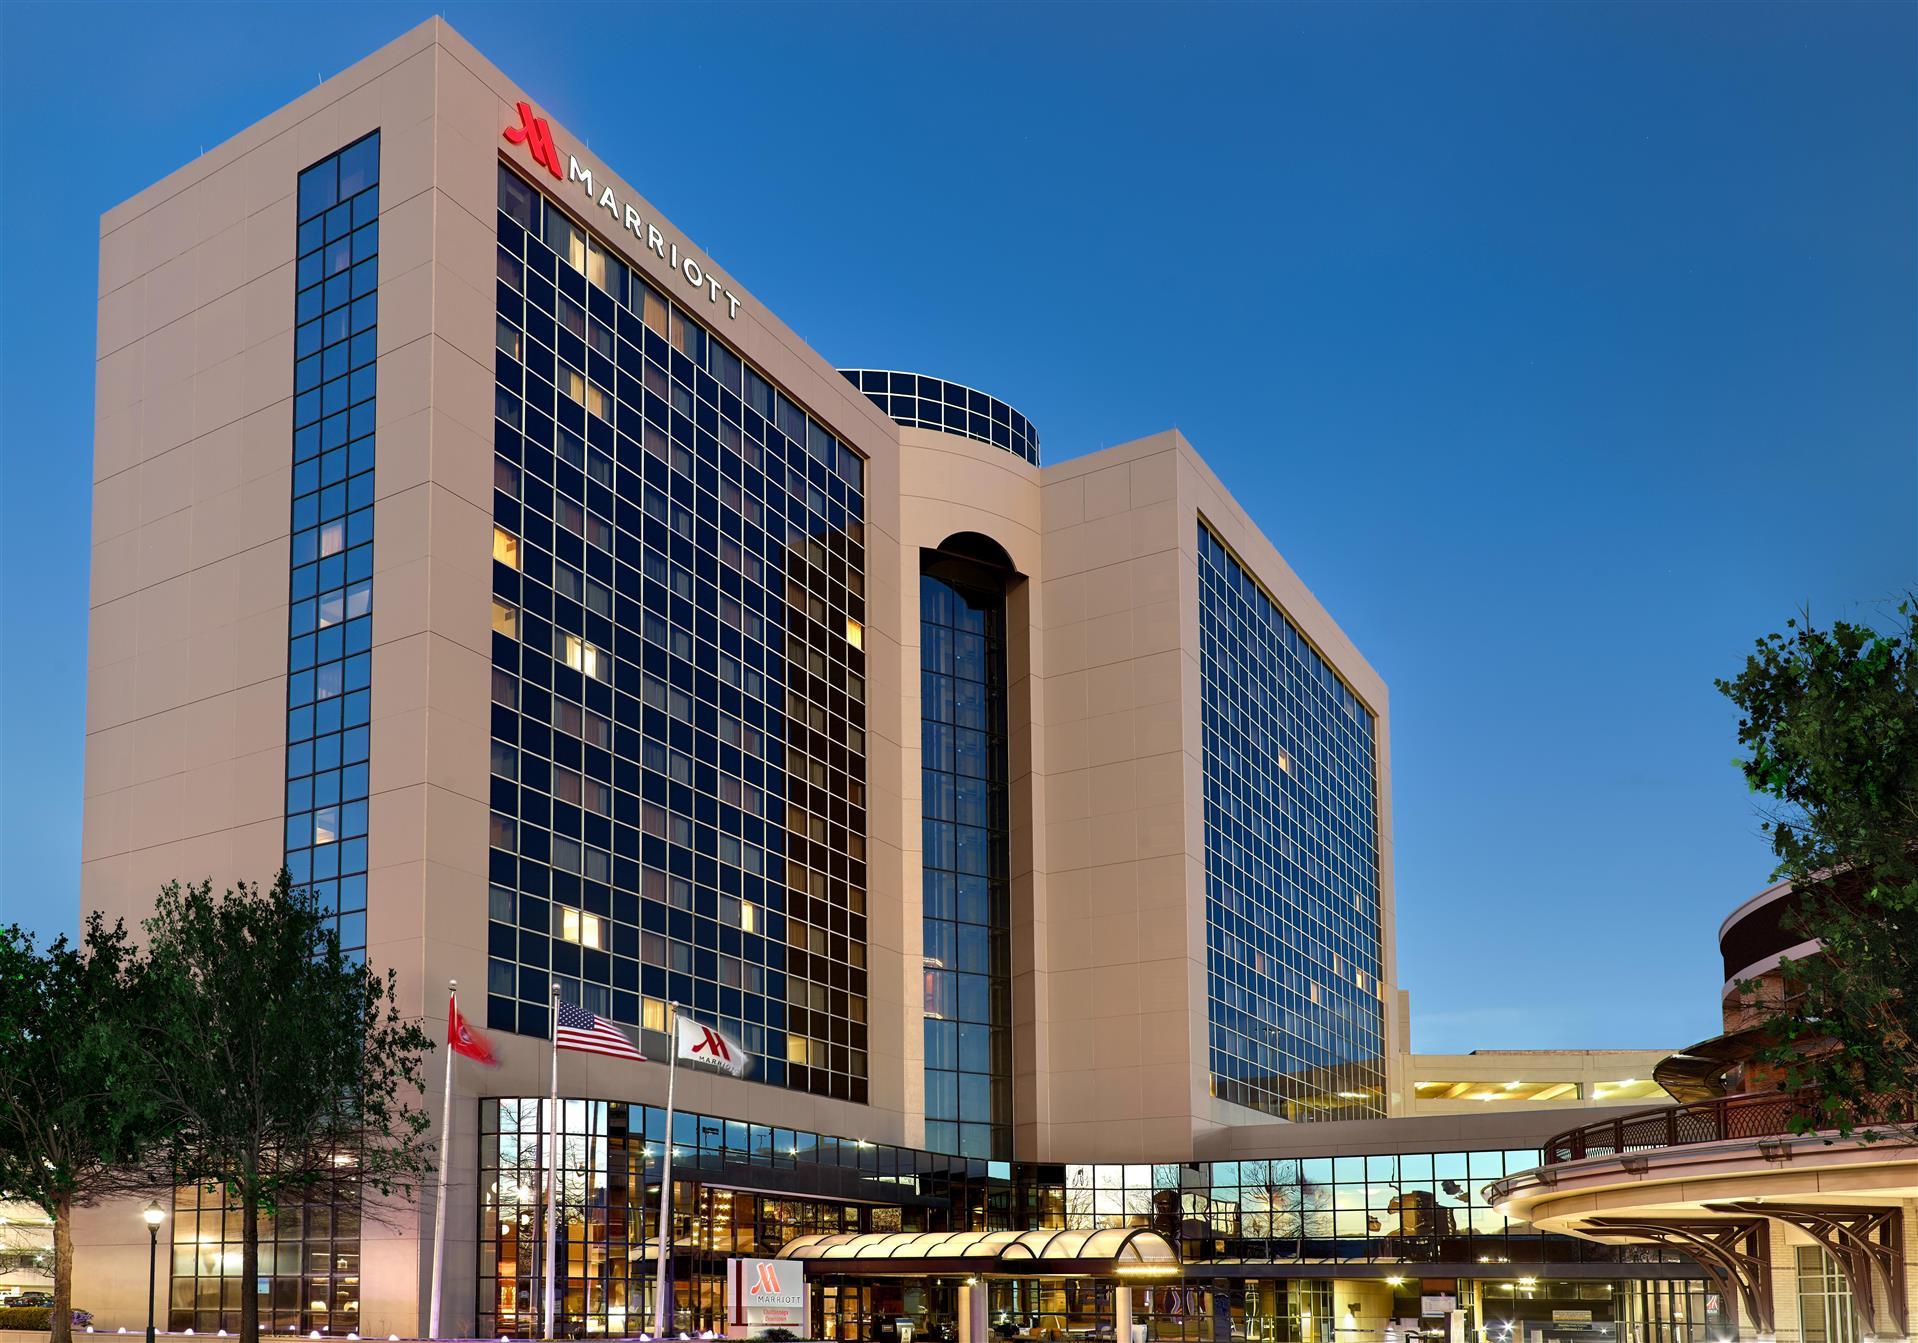 Chattanooga Marriott Downtown in Chattanooga, TN